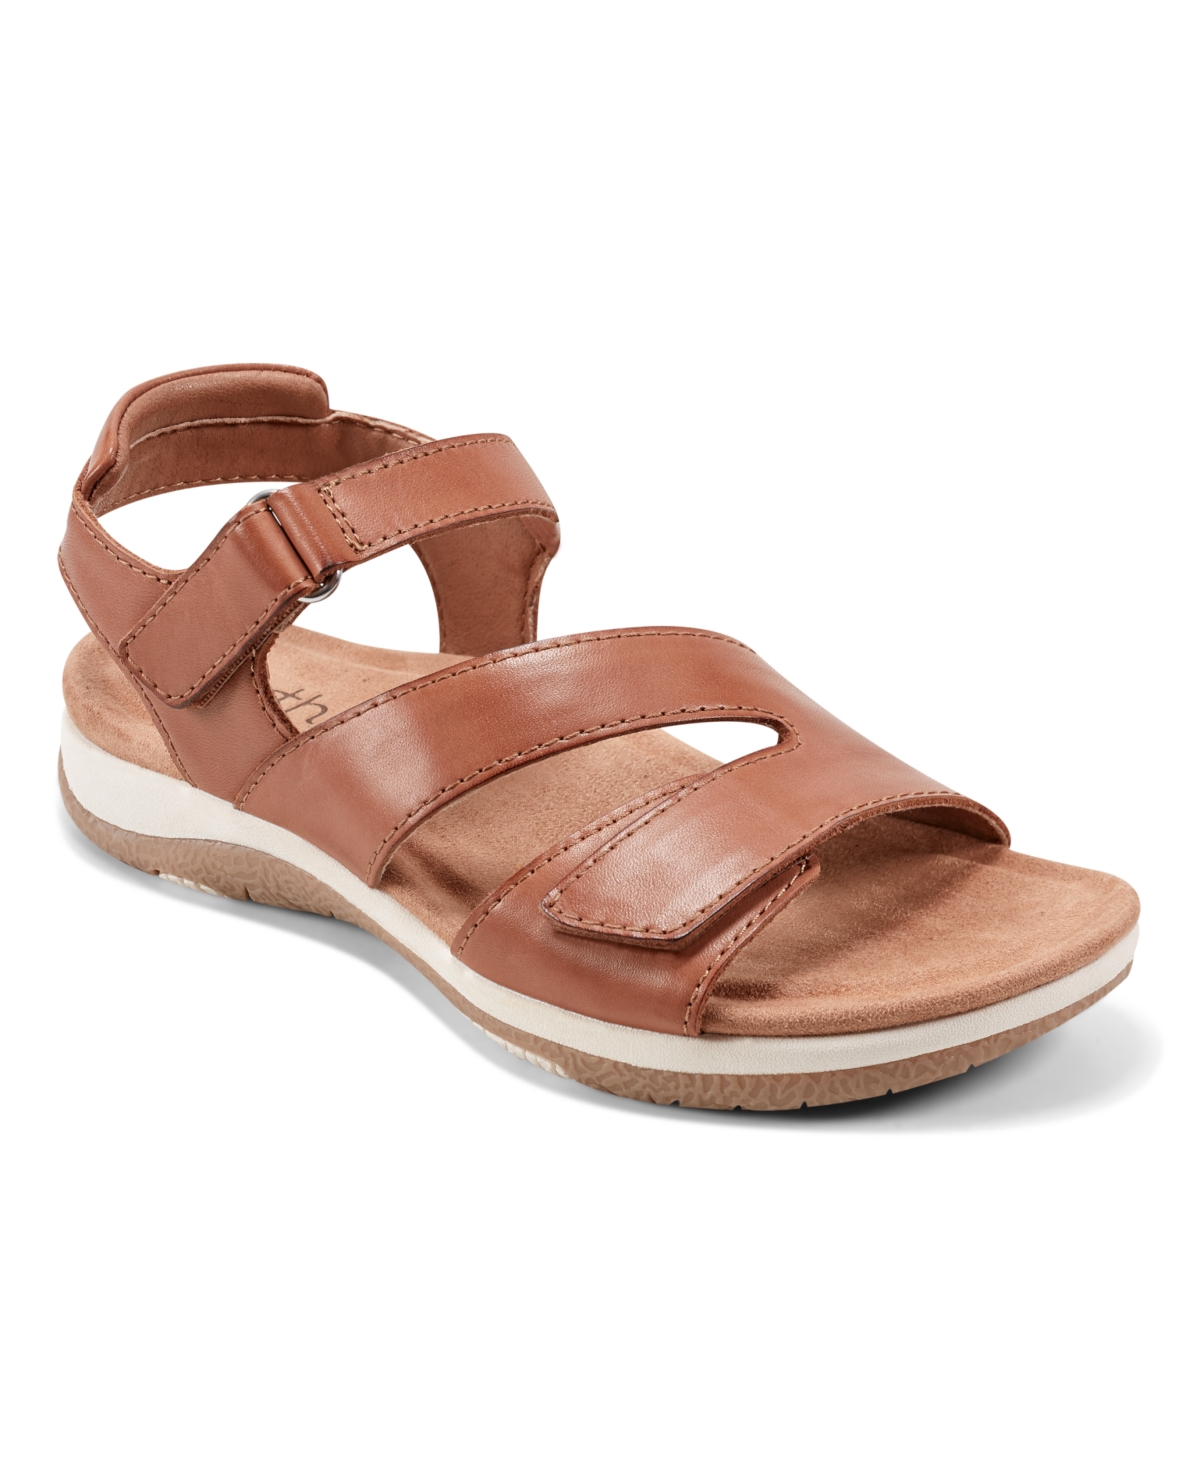 Earth Women's Sureal Quarter Strap Flat Casual Sandals In Medium Natural Leather